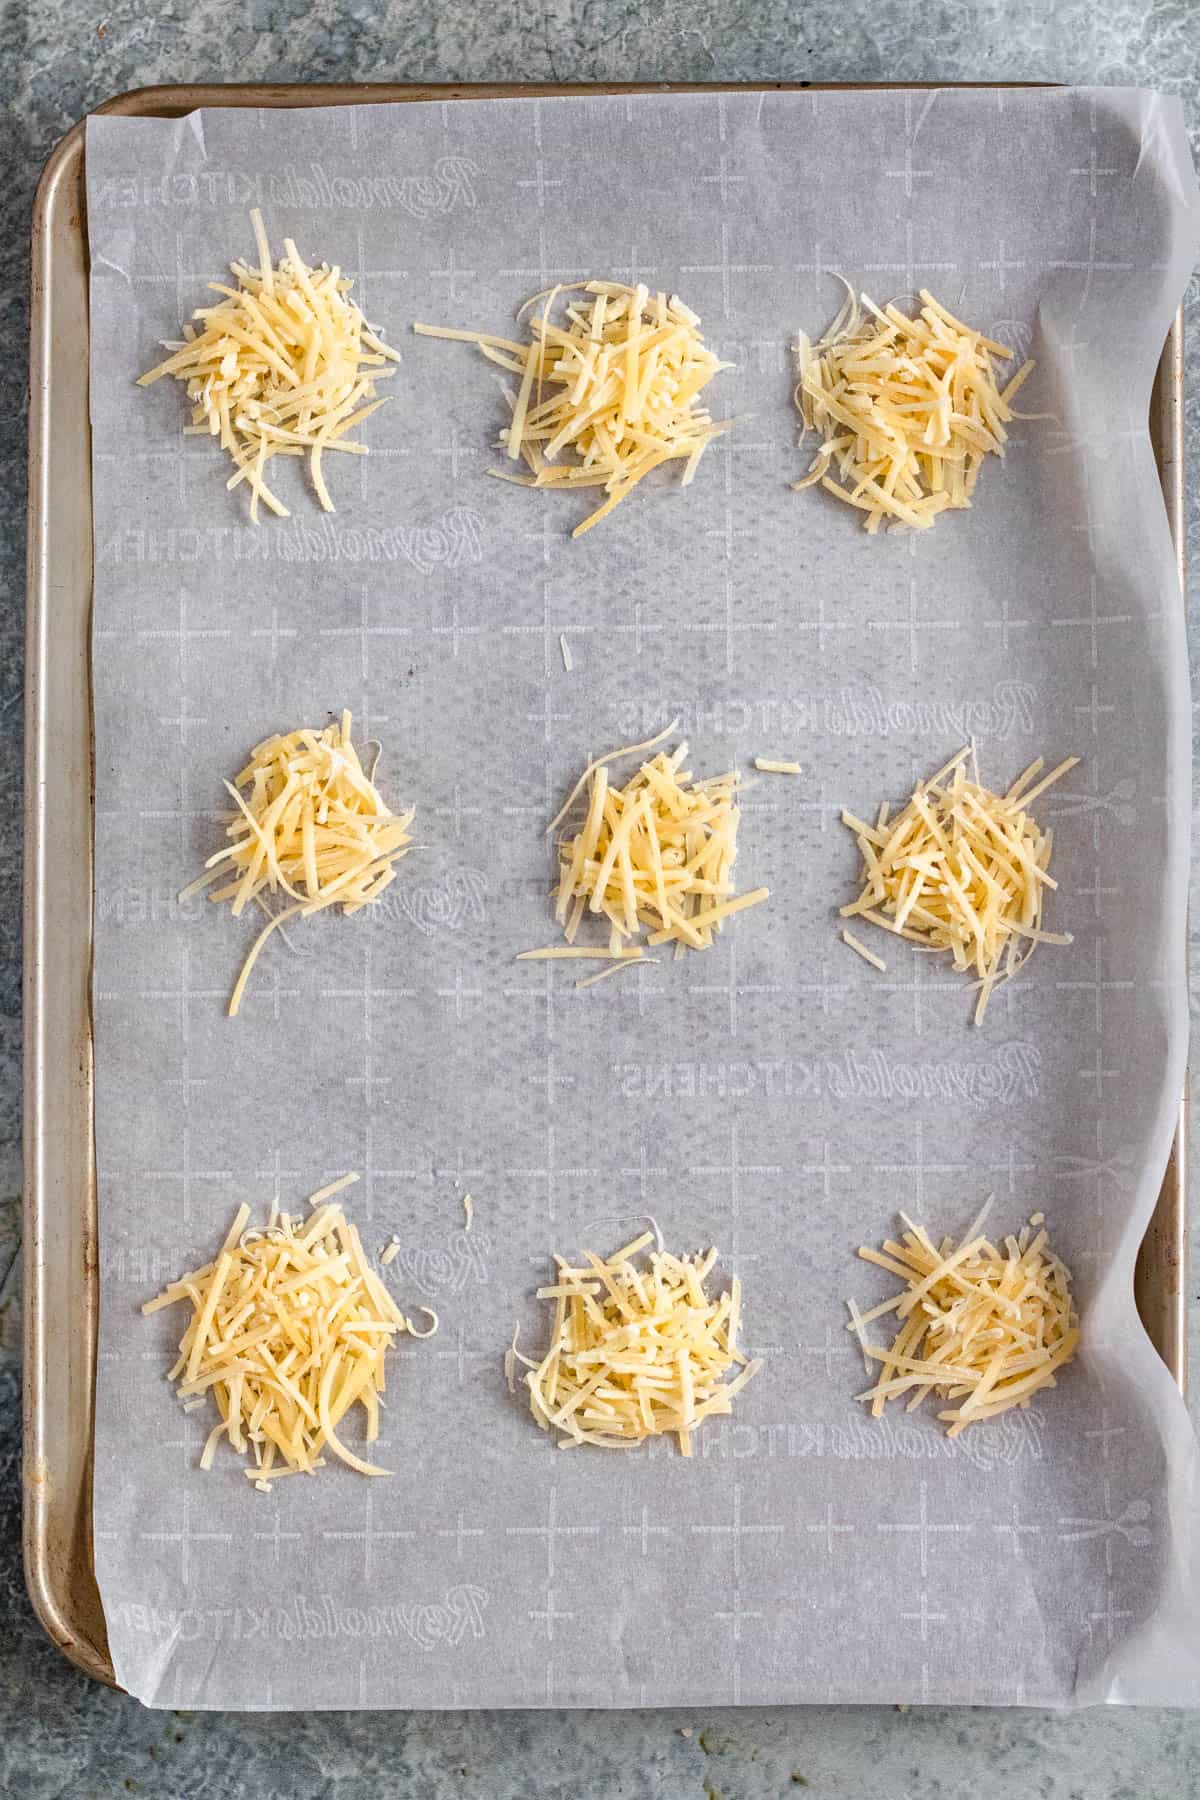 1 tablespoon piles of parmesan cheese on a baking sheet